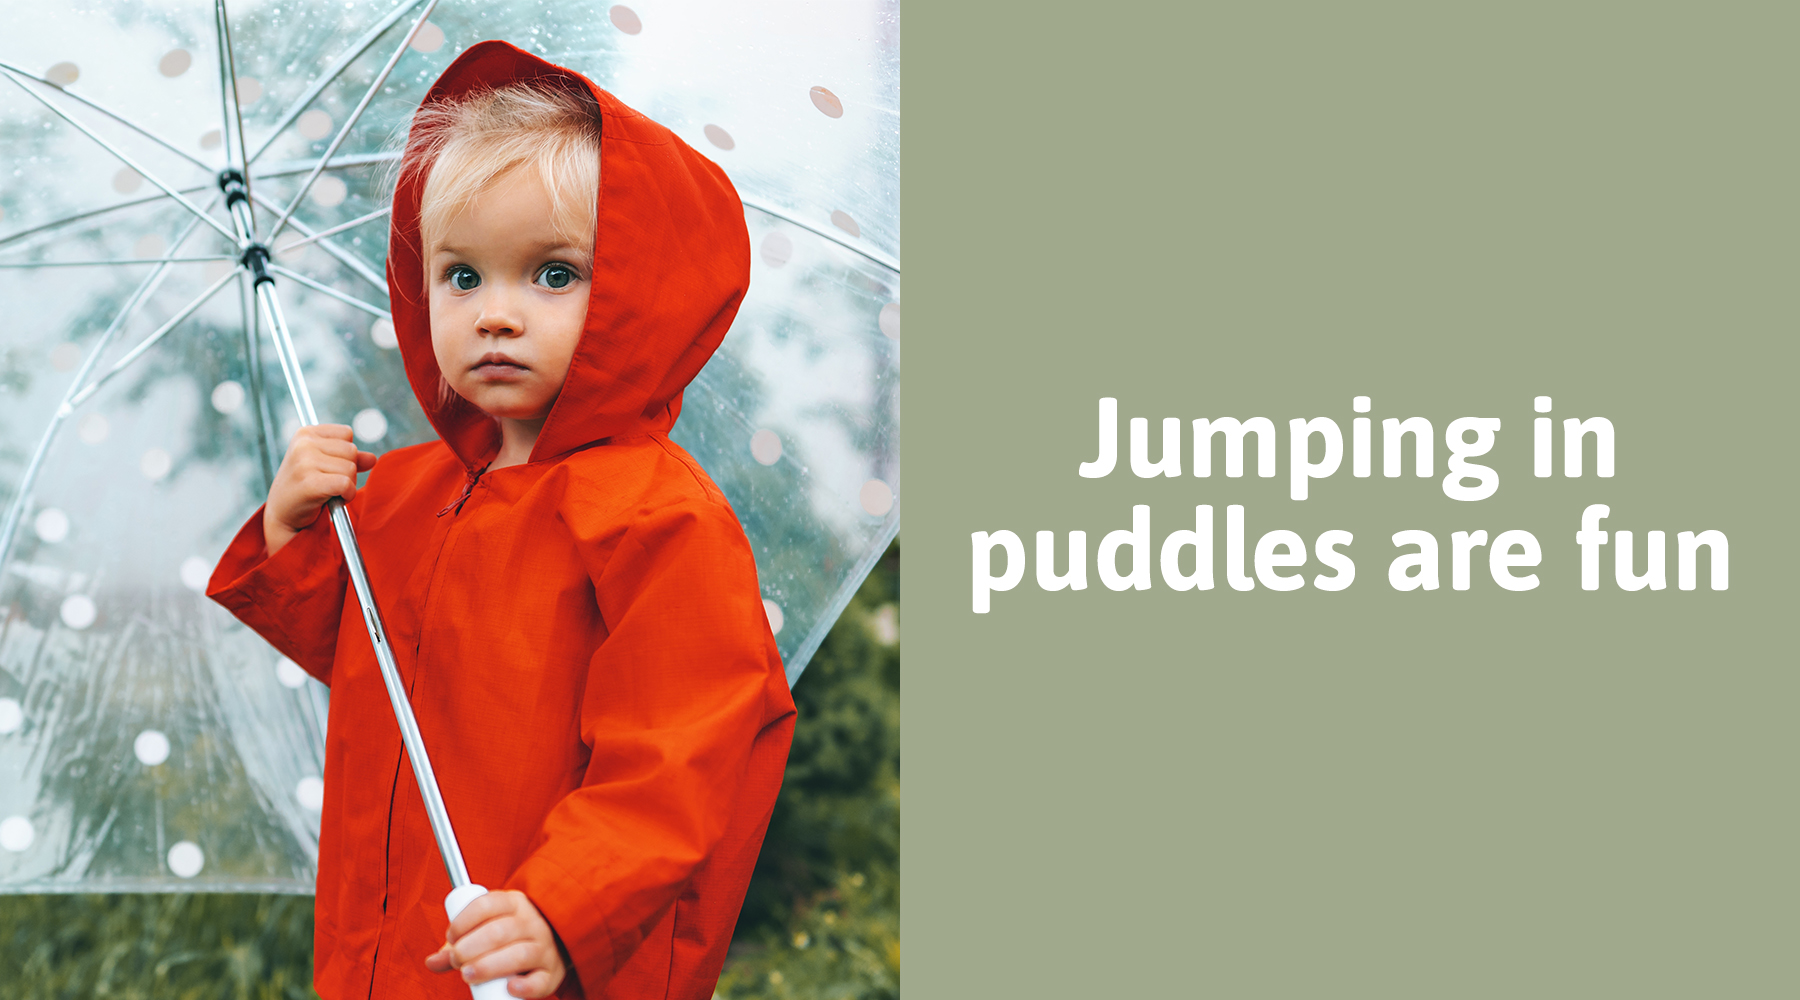 puddle-fun for kids